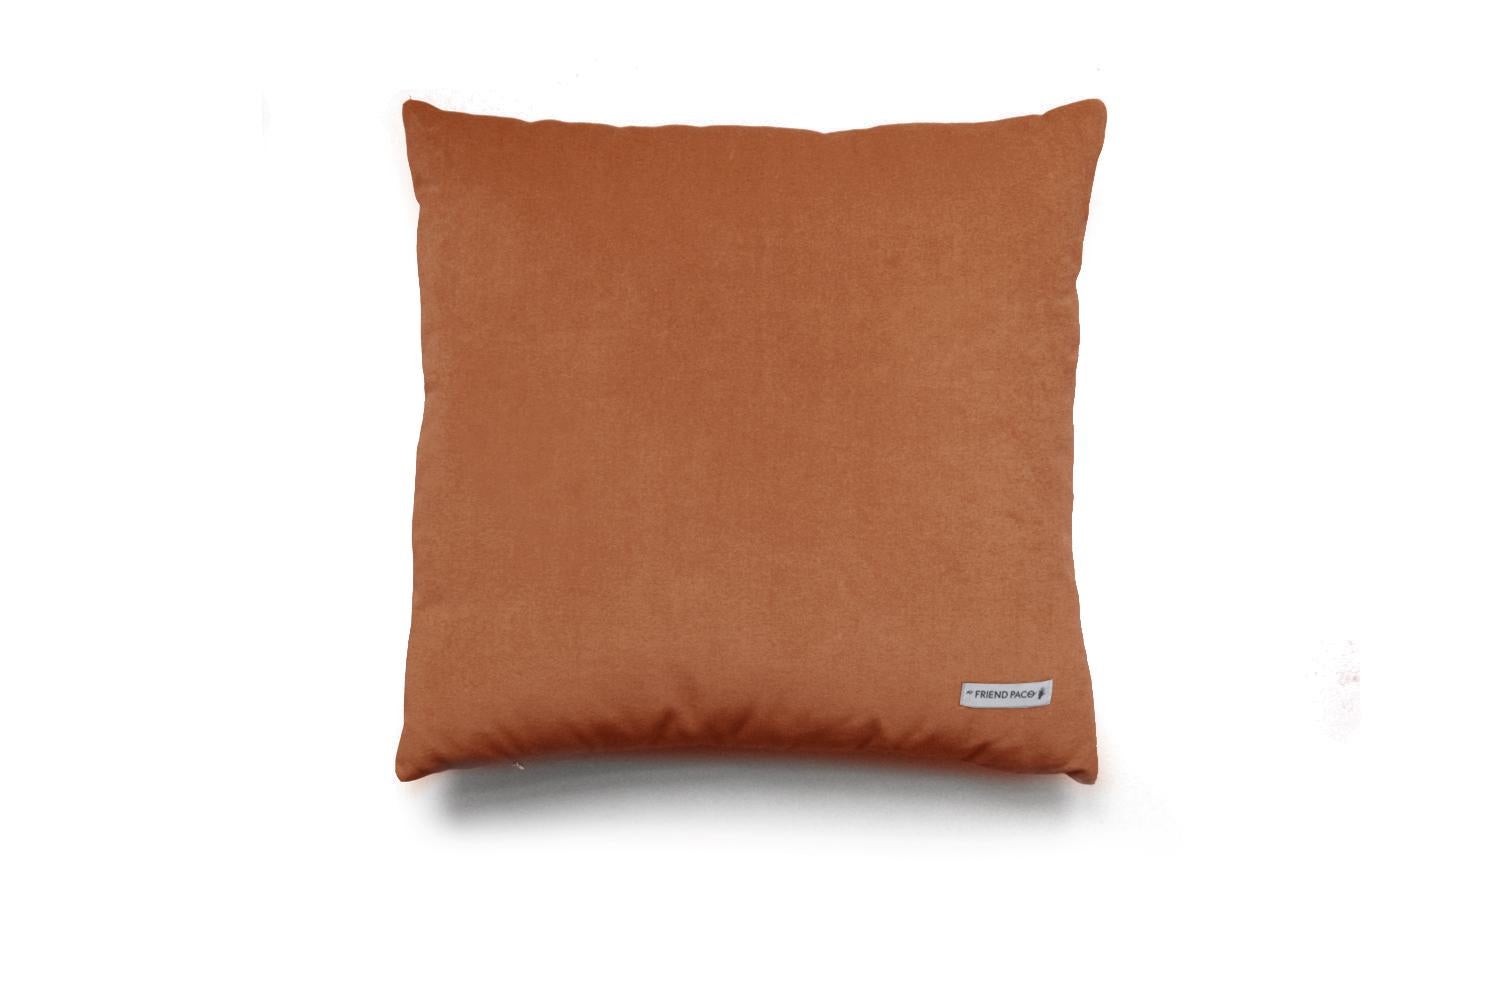 A talisman for the home of beauty, good energies and comfort. 
This decorative pillow is ethically produced by small family run business, hand-made by skilled portuguese artisans with top quality cotton velvet. Each piece is unique and made